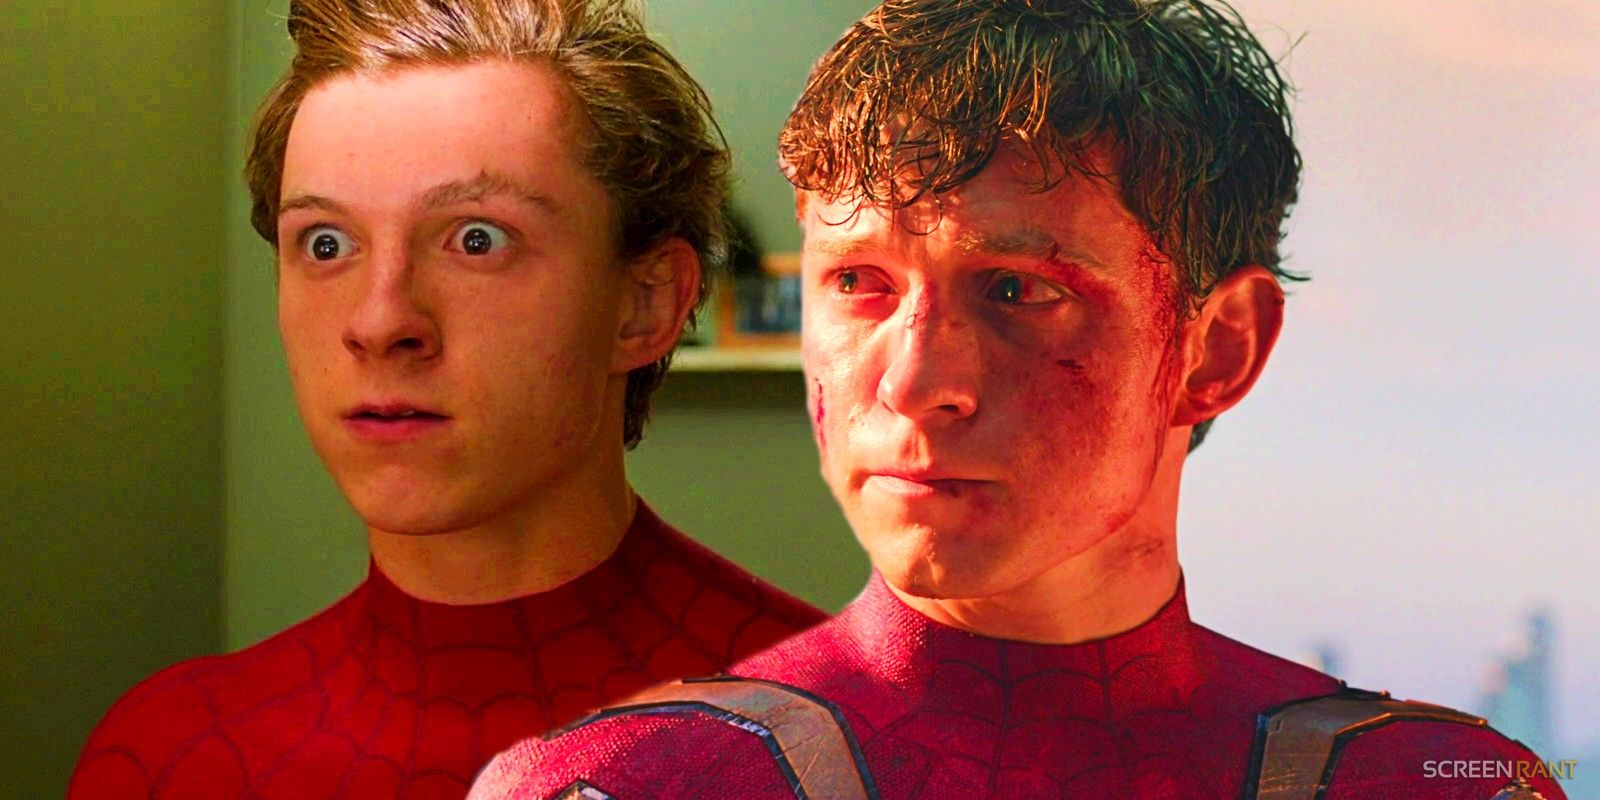 Tom Holland in Spider-Man Homecoming and Spider-Man No Way Home